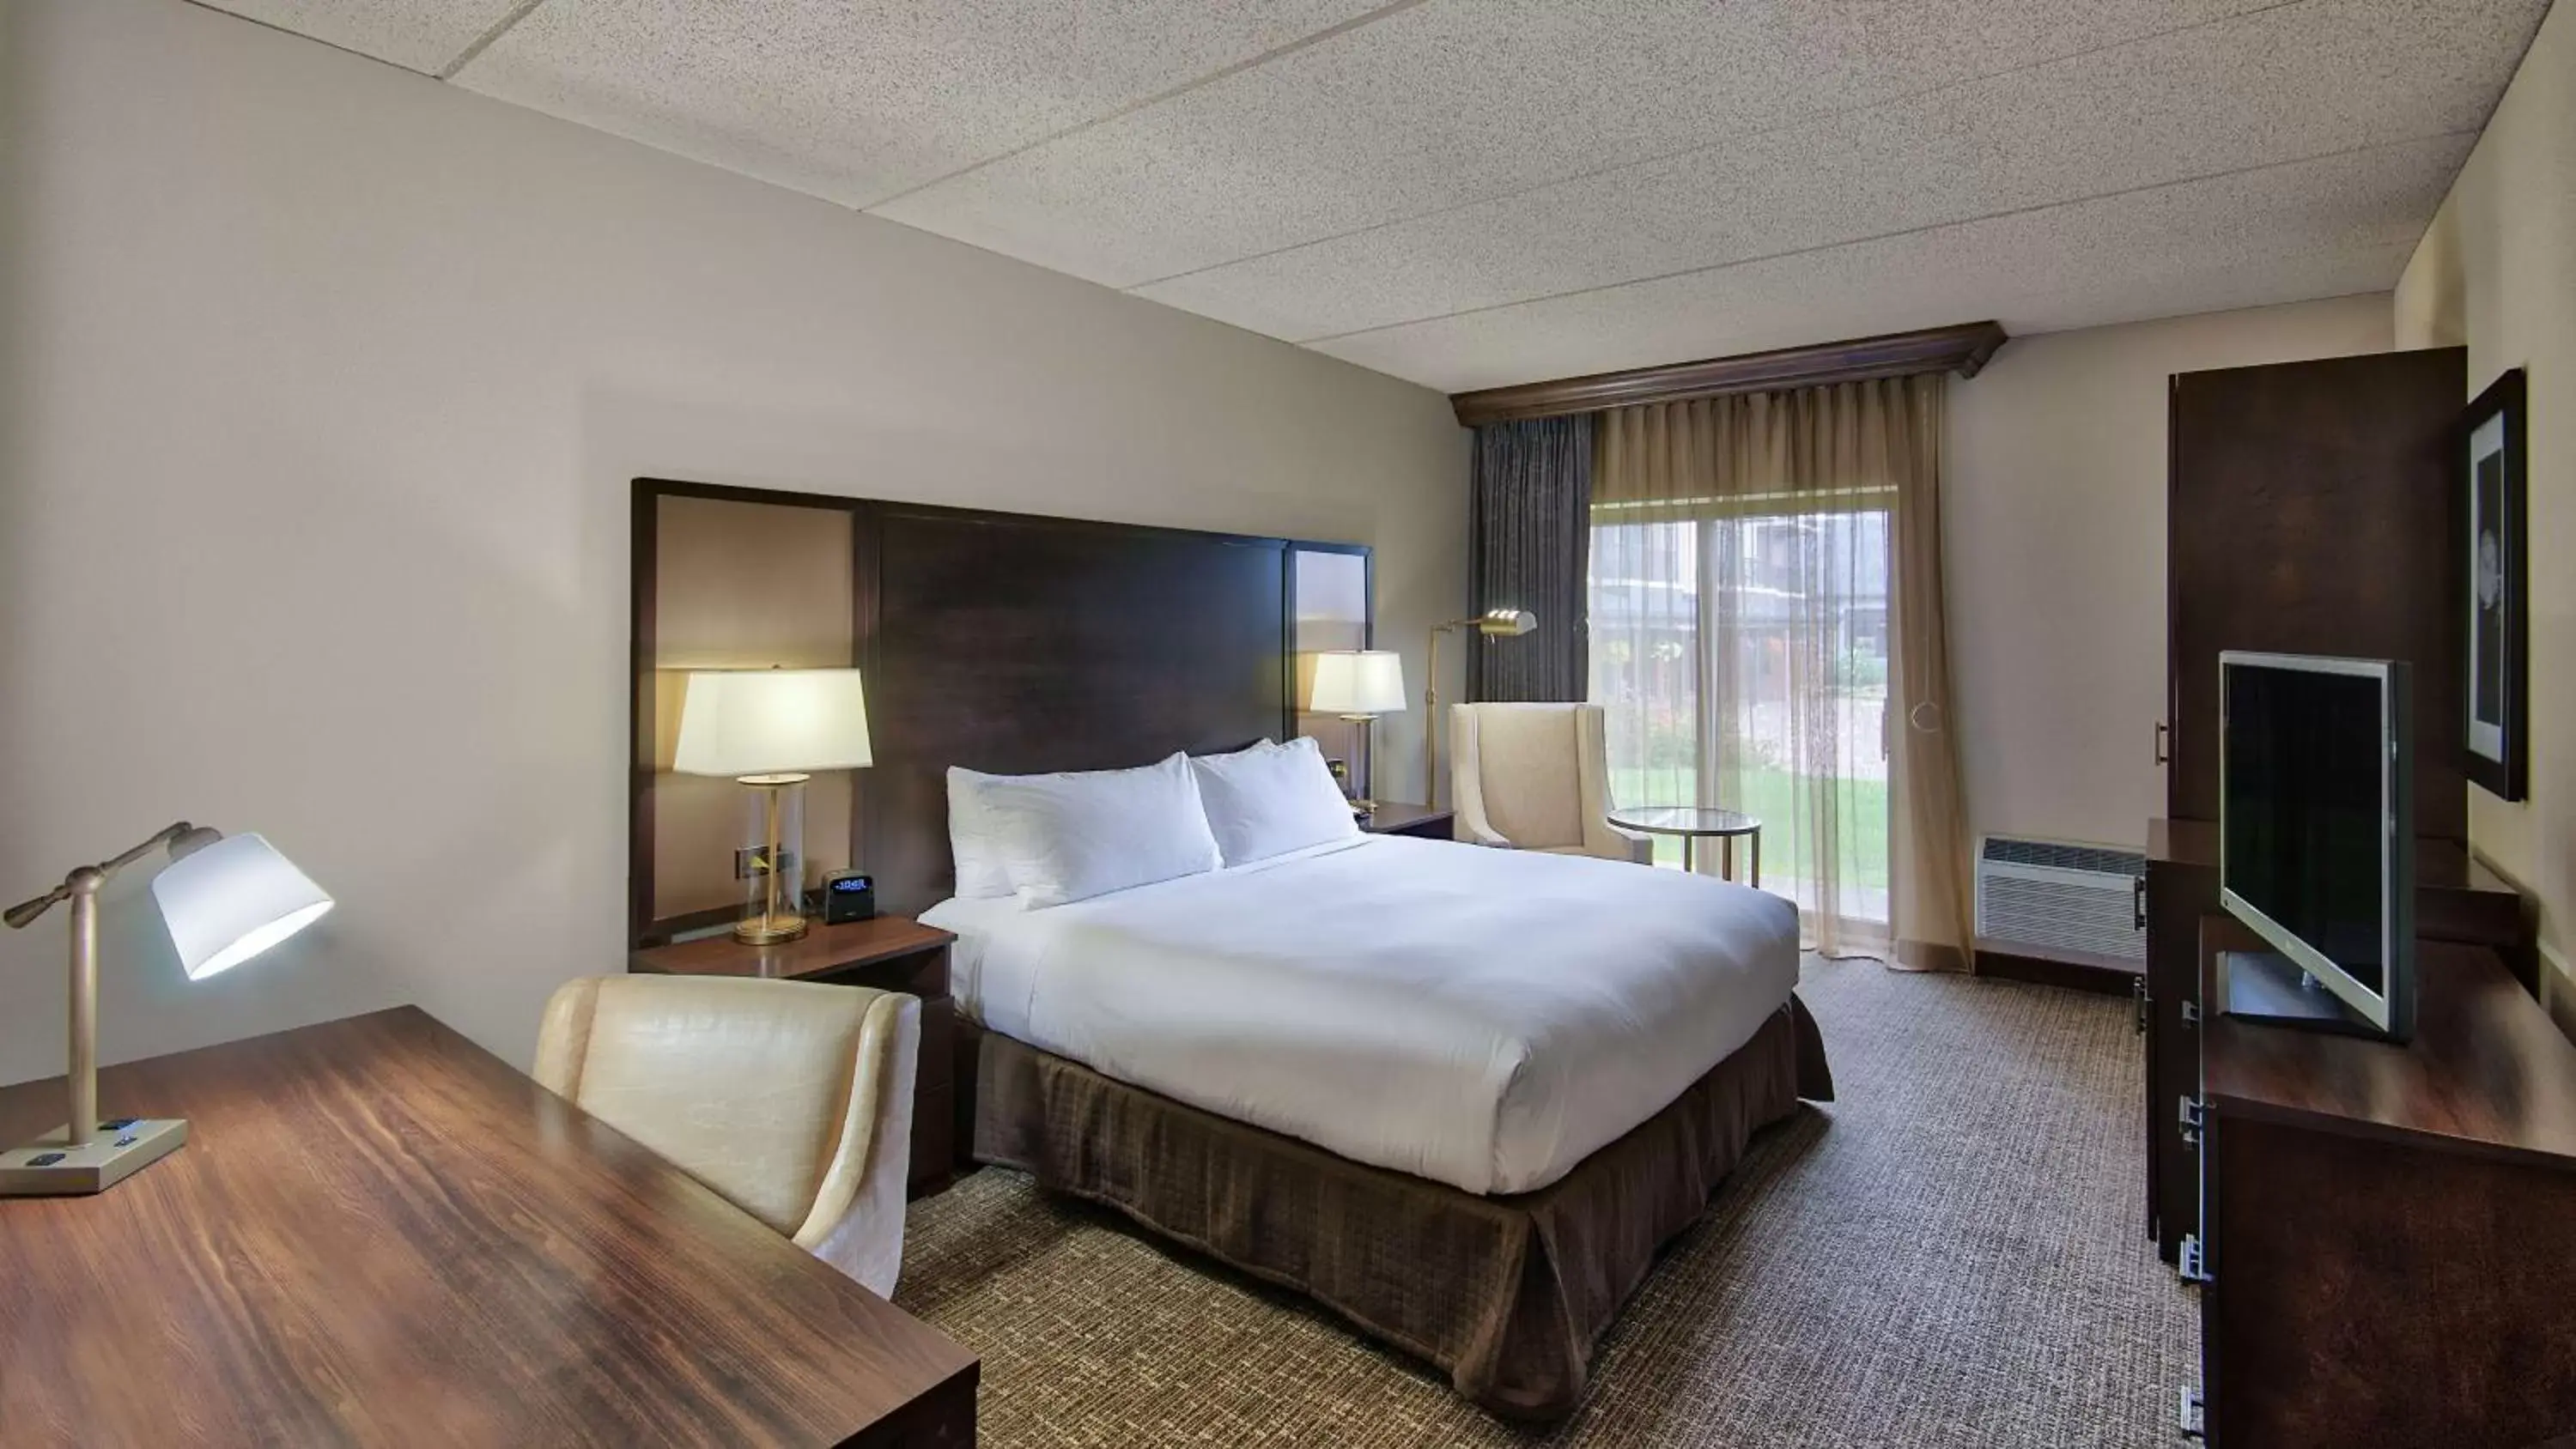 Bedroom in DoubleTree by Hilton Port Huron